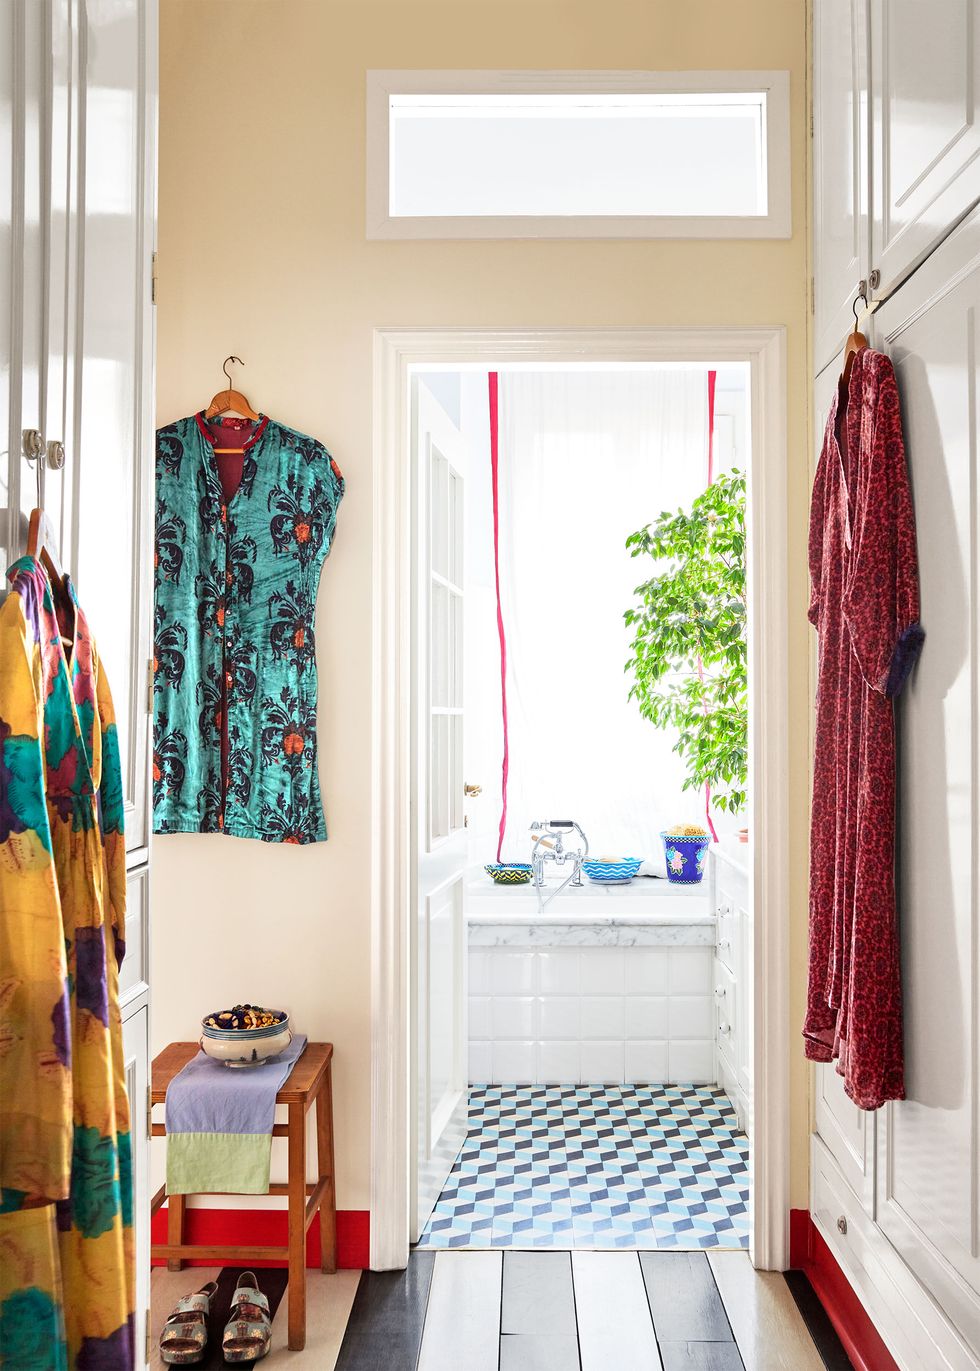 dressing room off bath with colorful caftans hanging